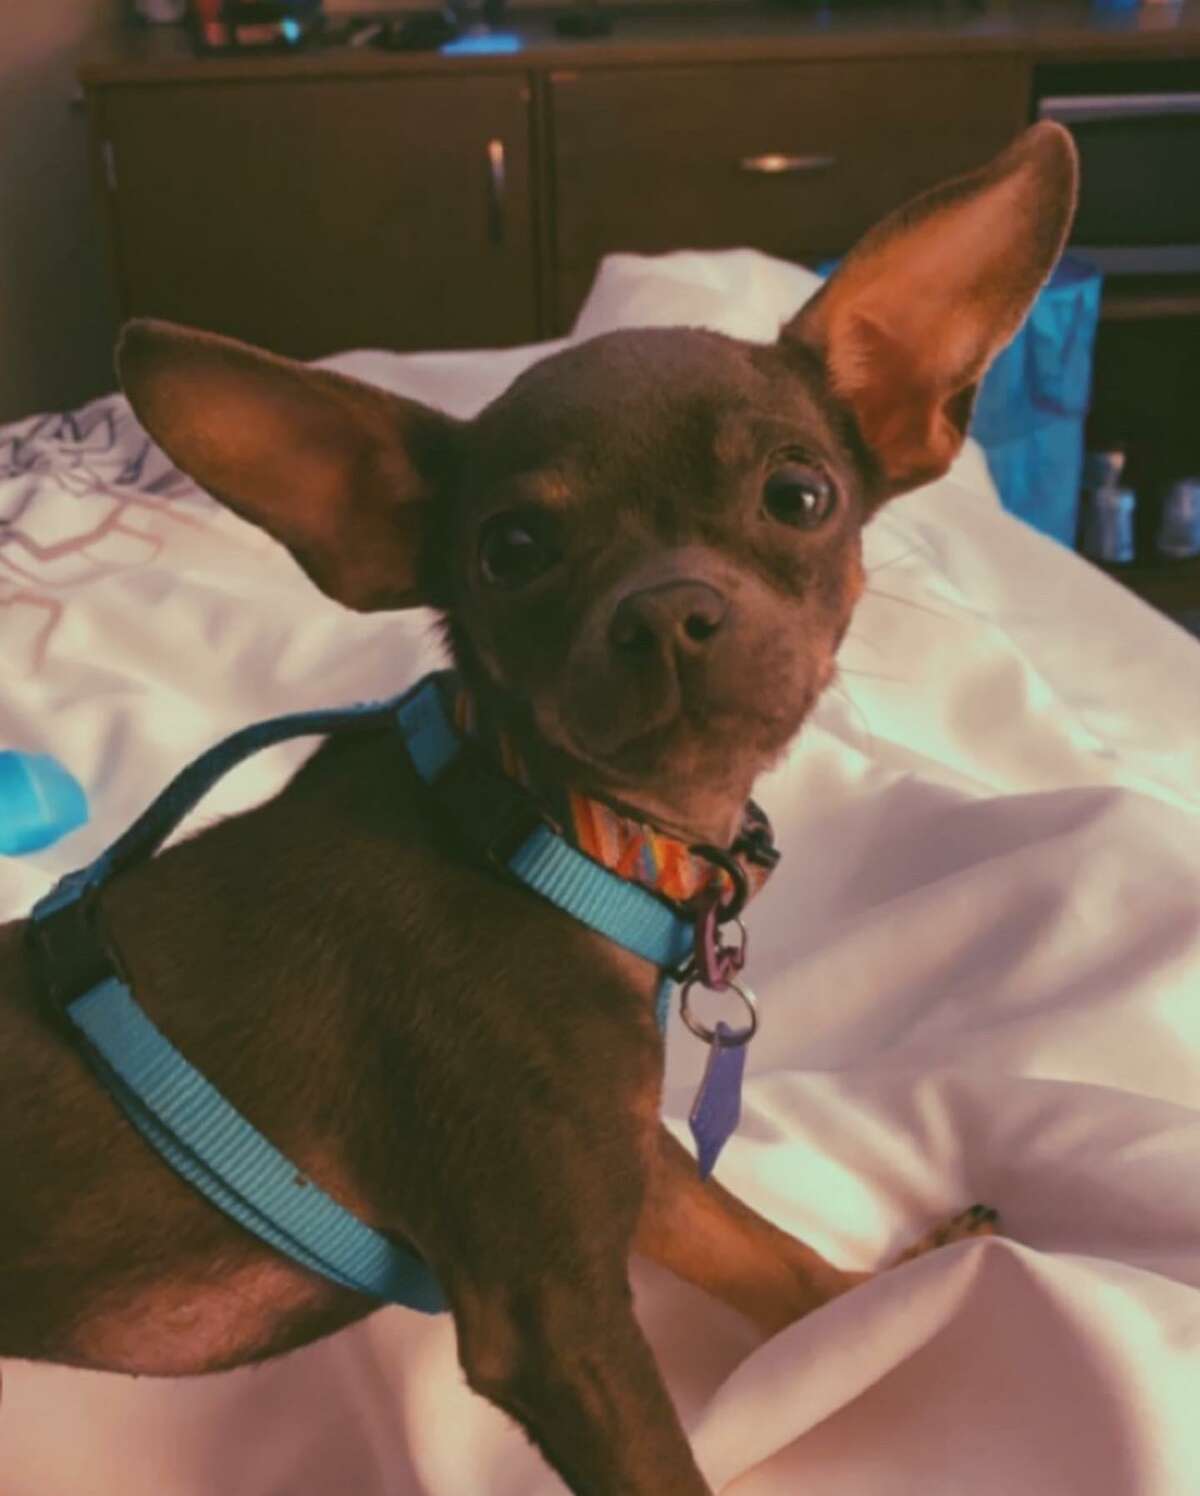 Rylee, an 8-month old female, was left in the car in a public parking lot Bay Street at the Embarcadero while her owner, Amanda Chapman visited the Fisherman’s Wharf area on the afternoon of May 24.